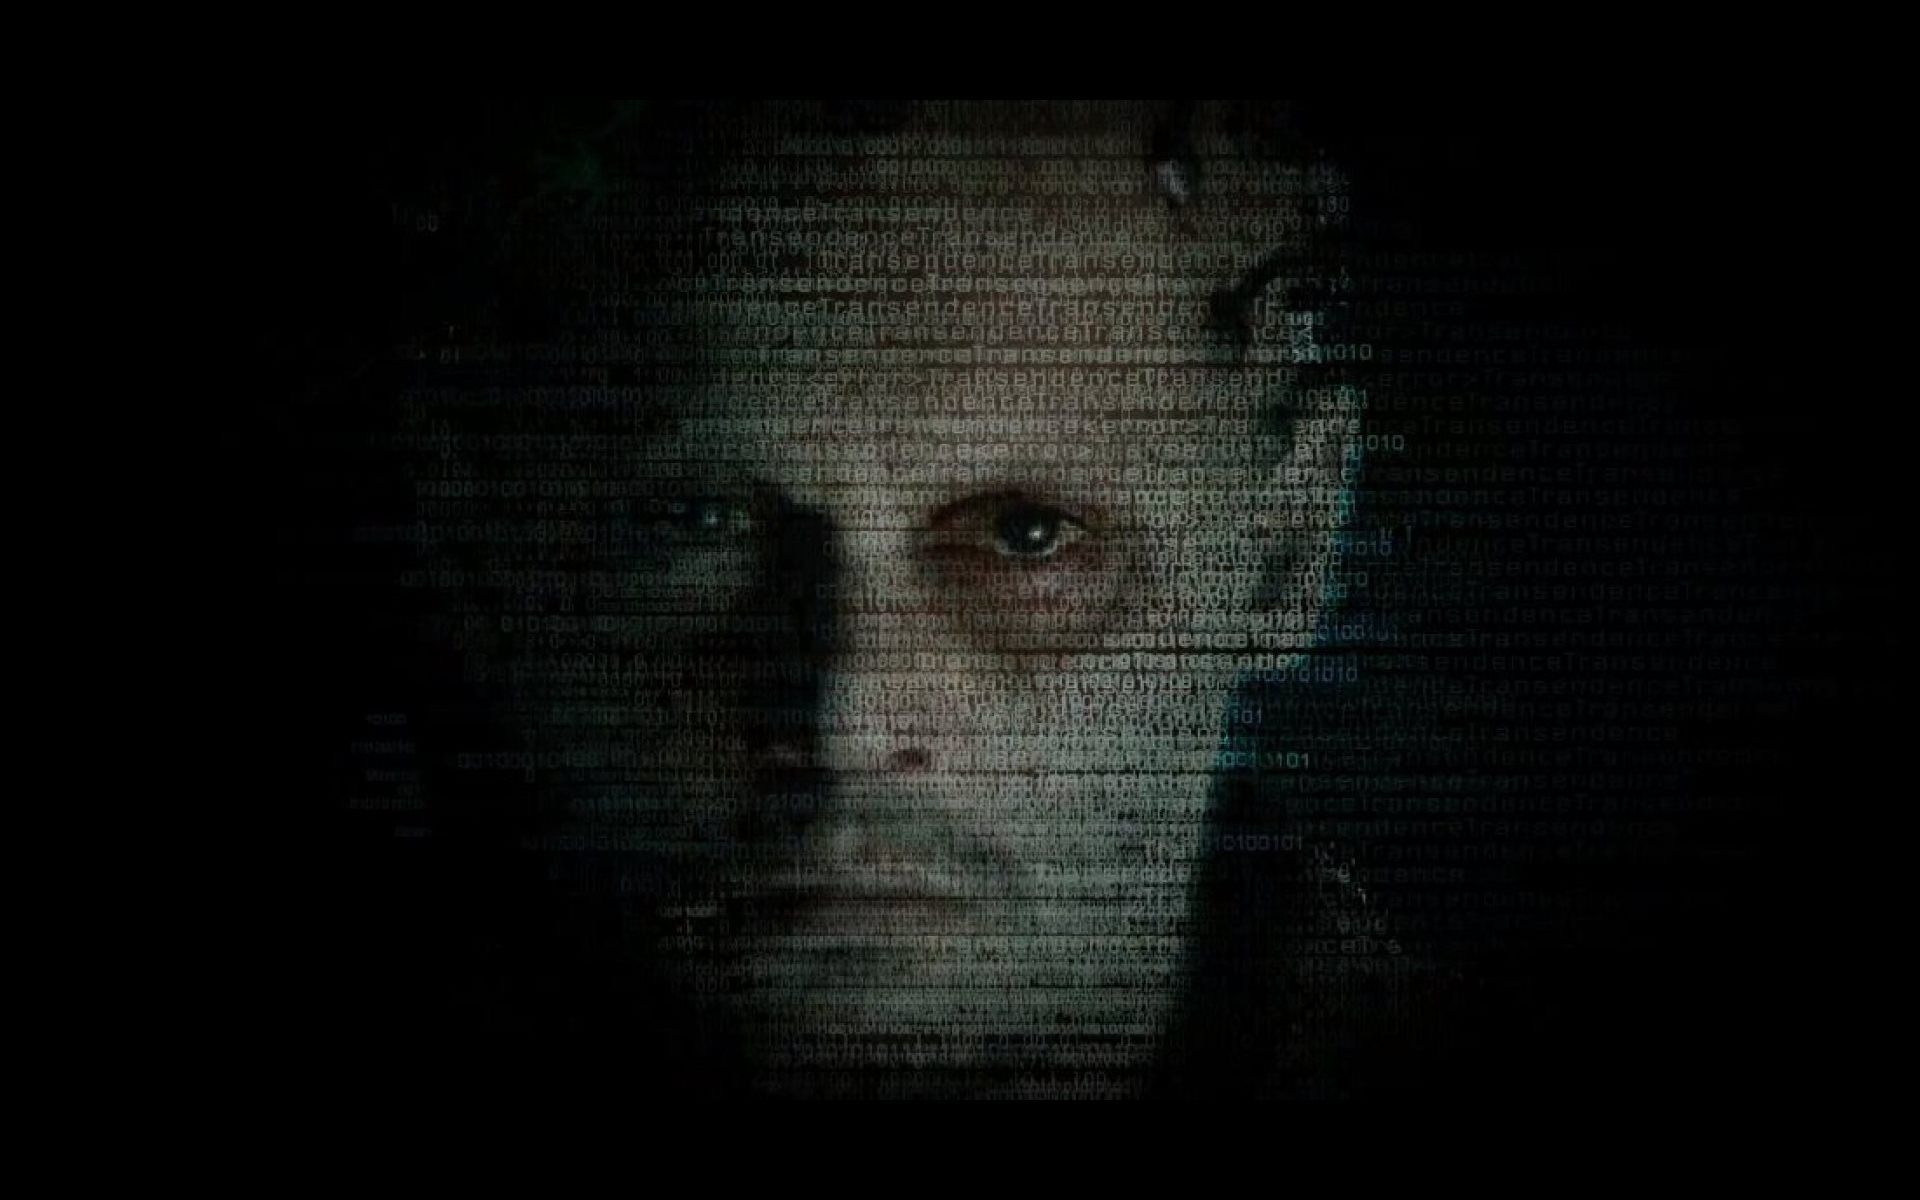 Transcendence (2014) Johnny Depp, High Definition, High Quality, Widescreen